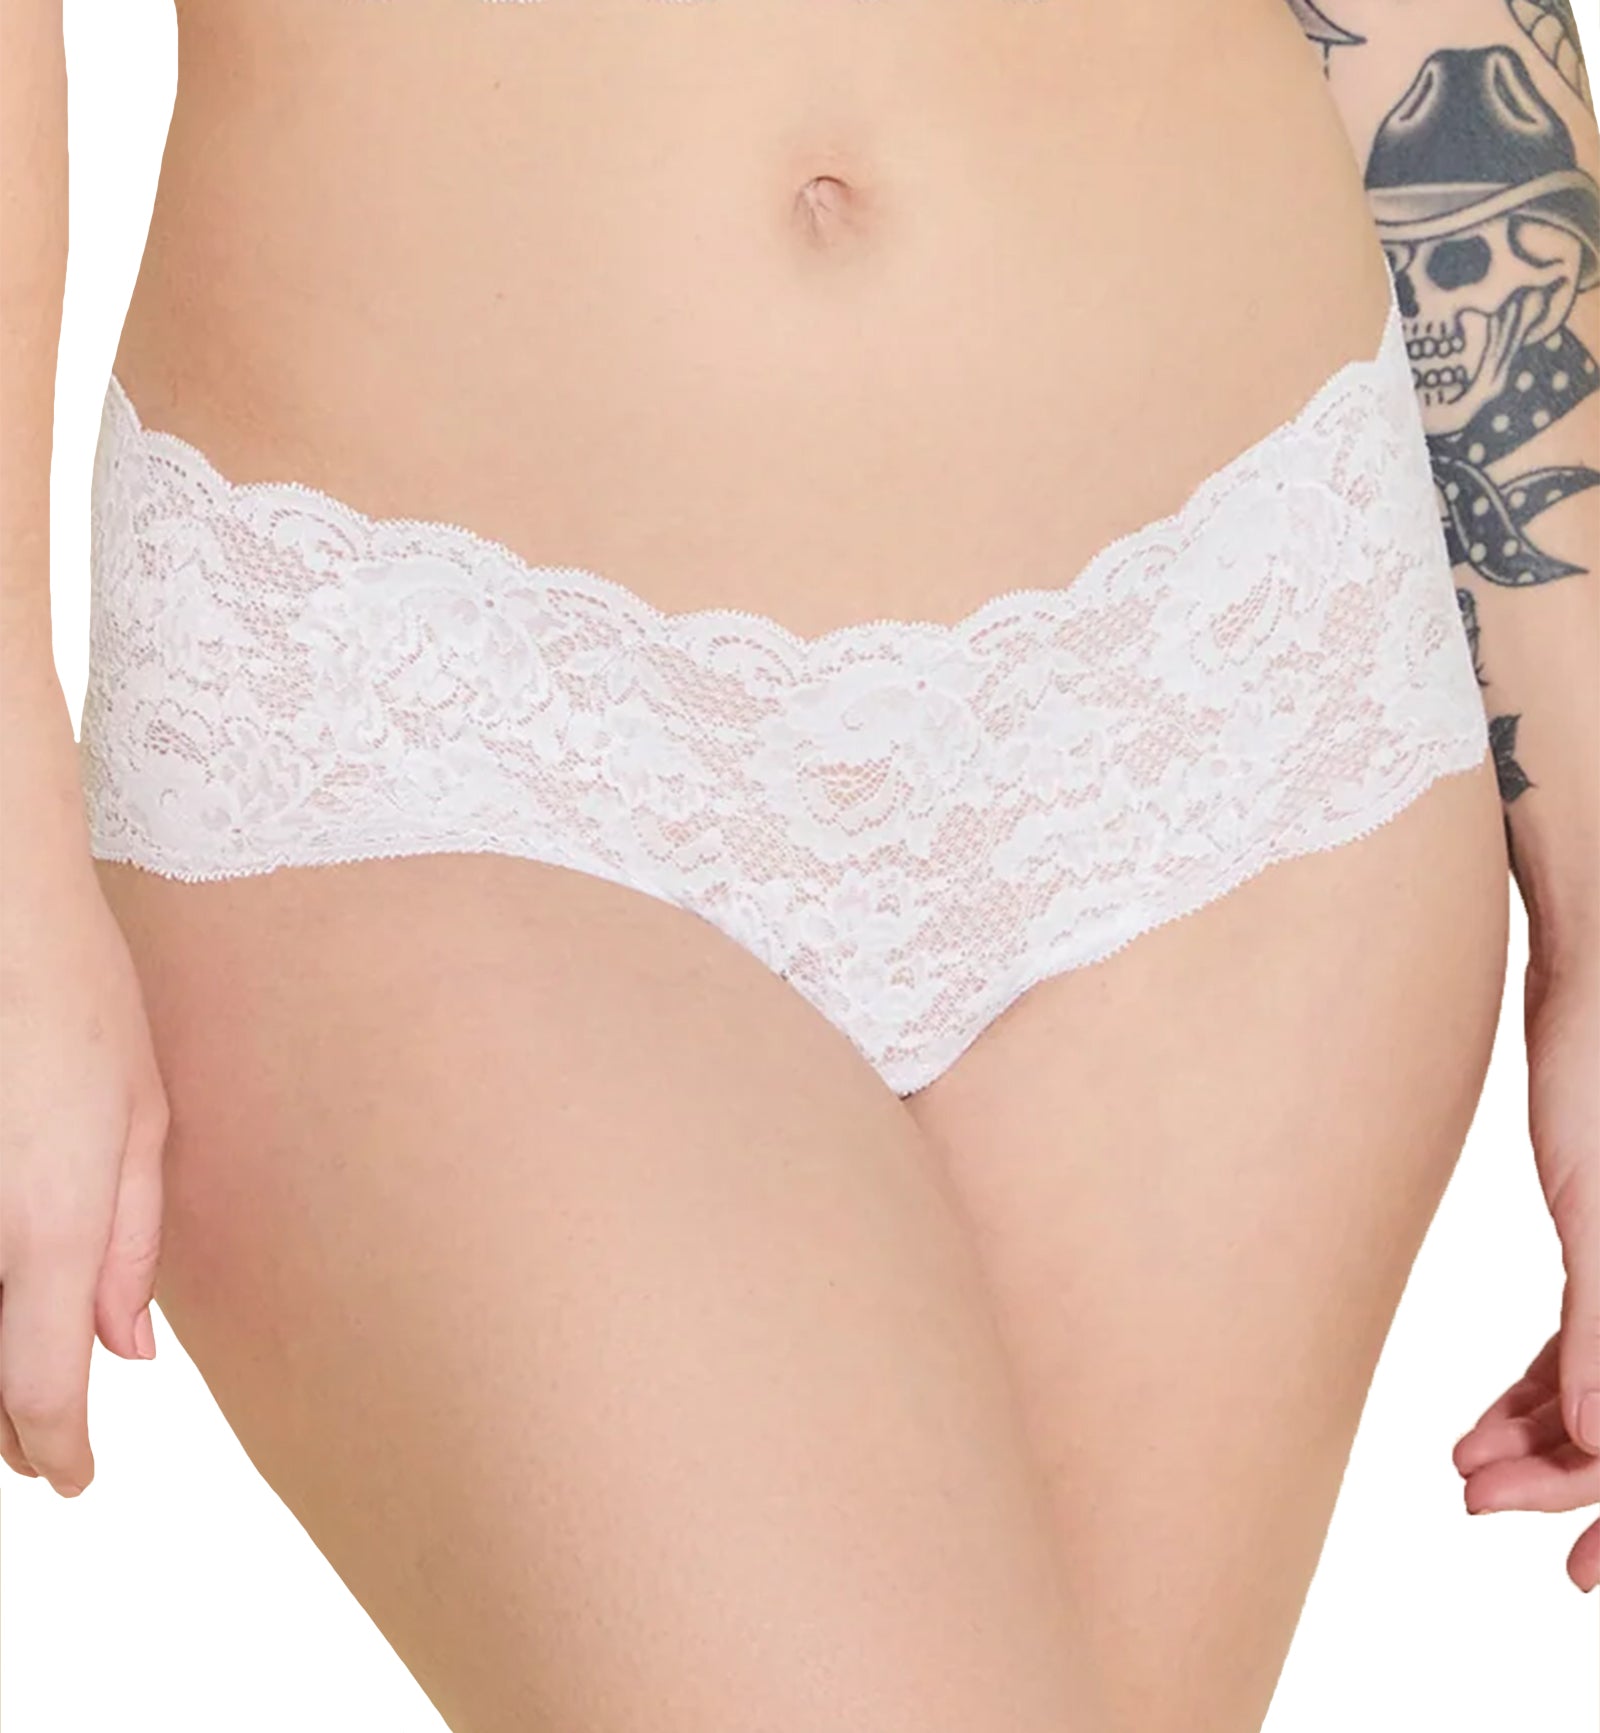 Cosabella Never Say Never Hottie Lowrider Hotpant (NEVER07ZL),S/M,White - White,S/M